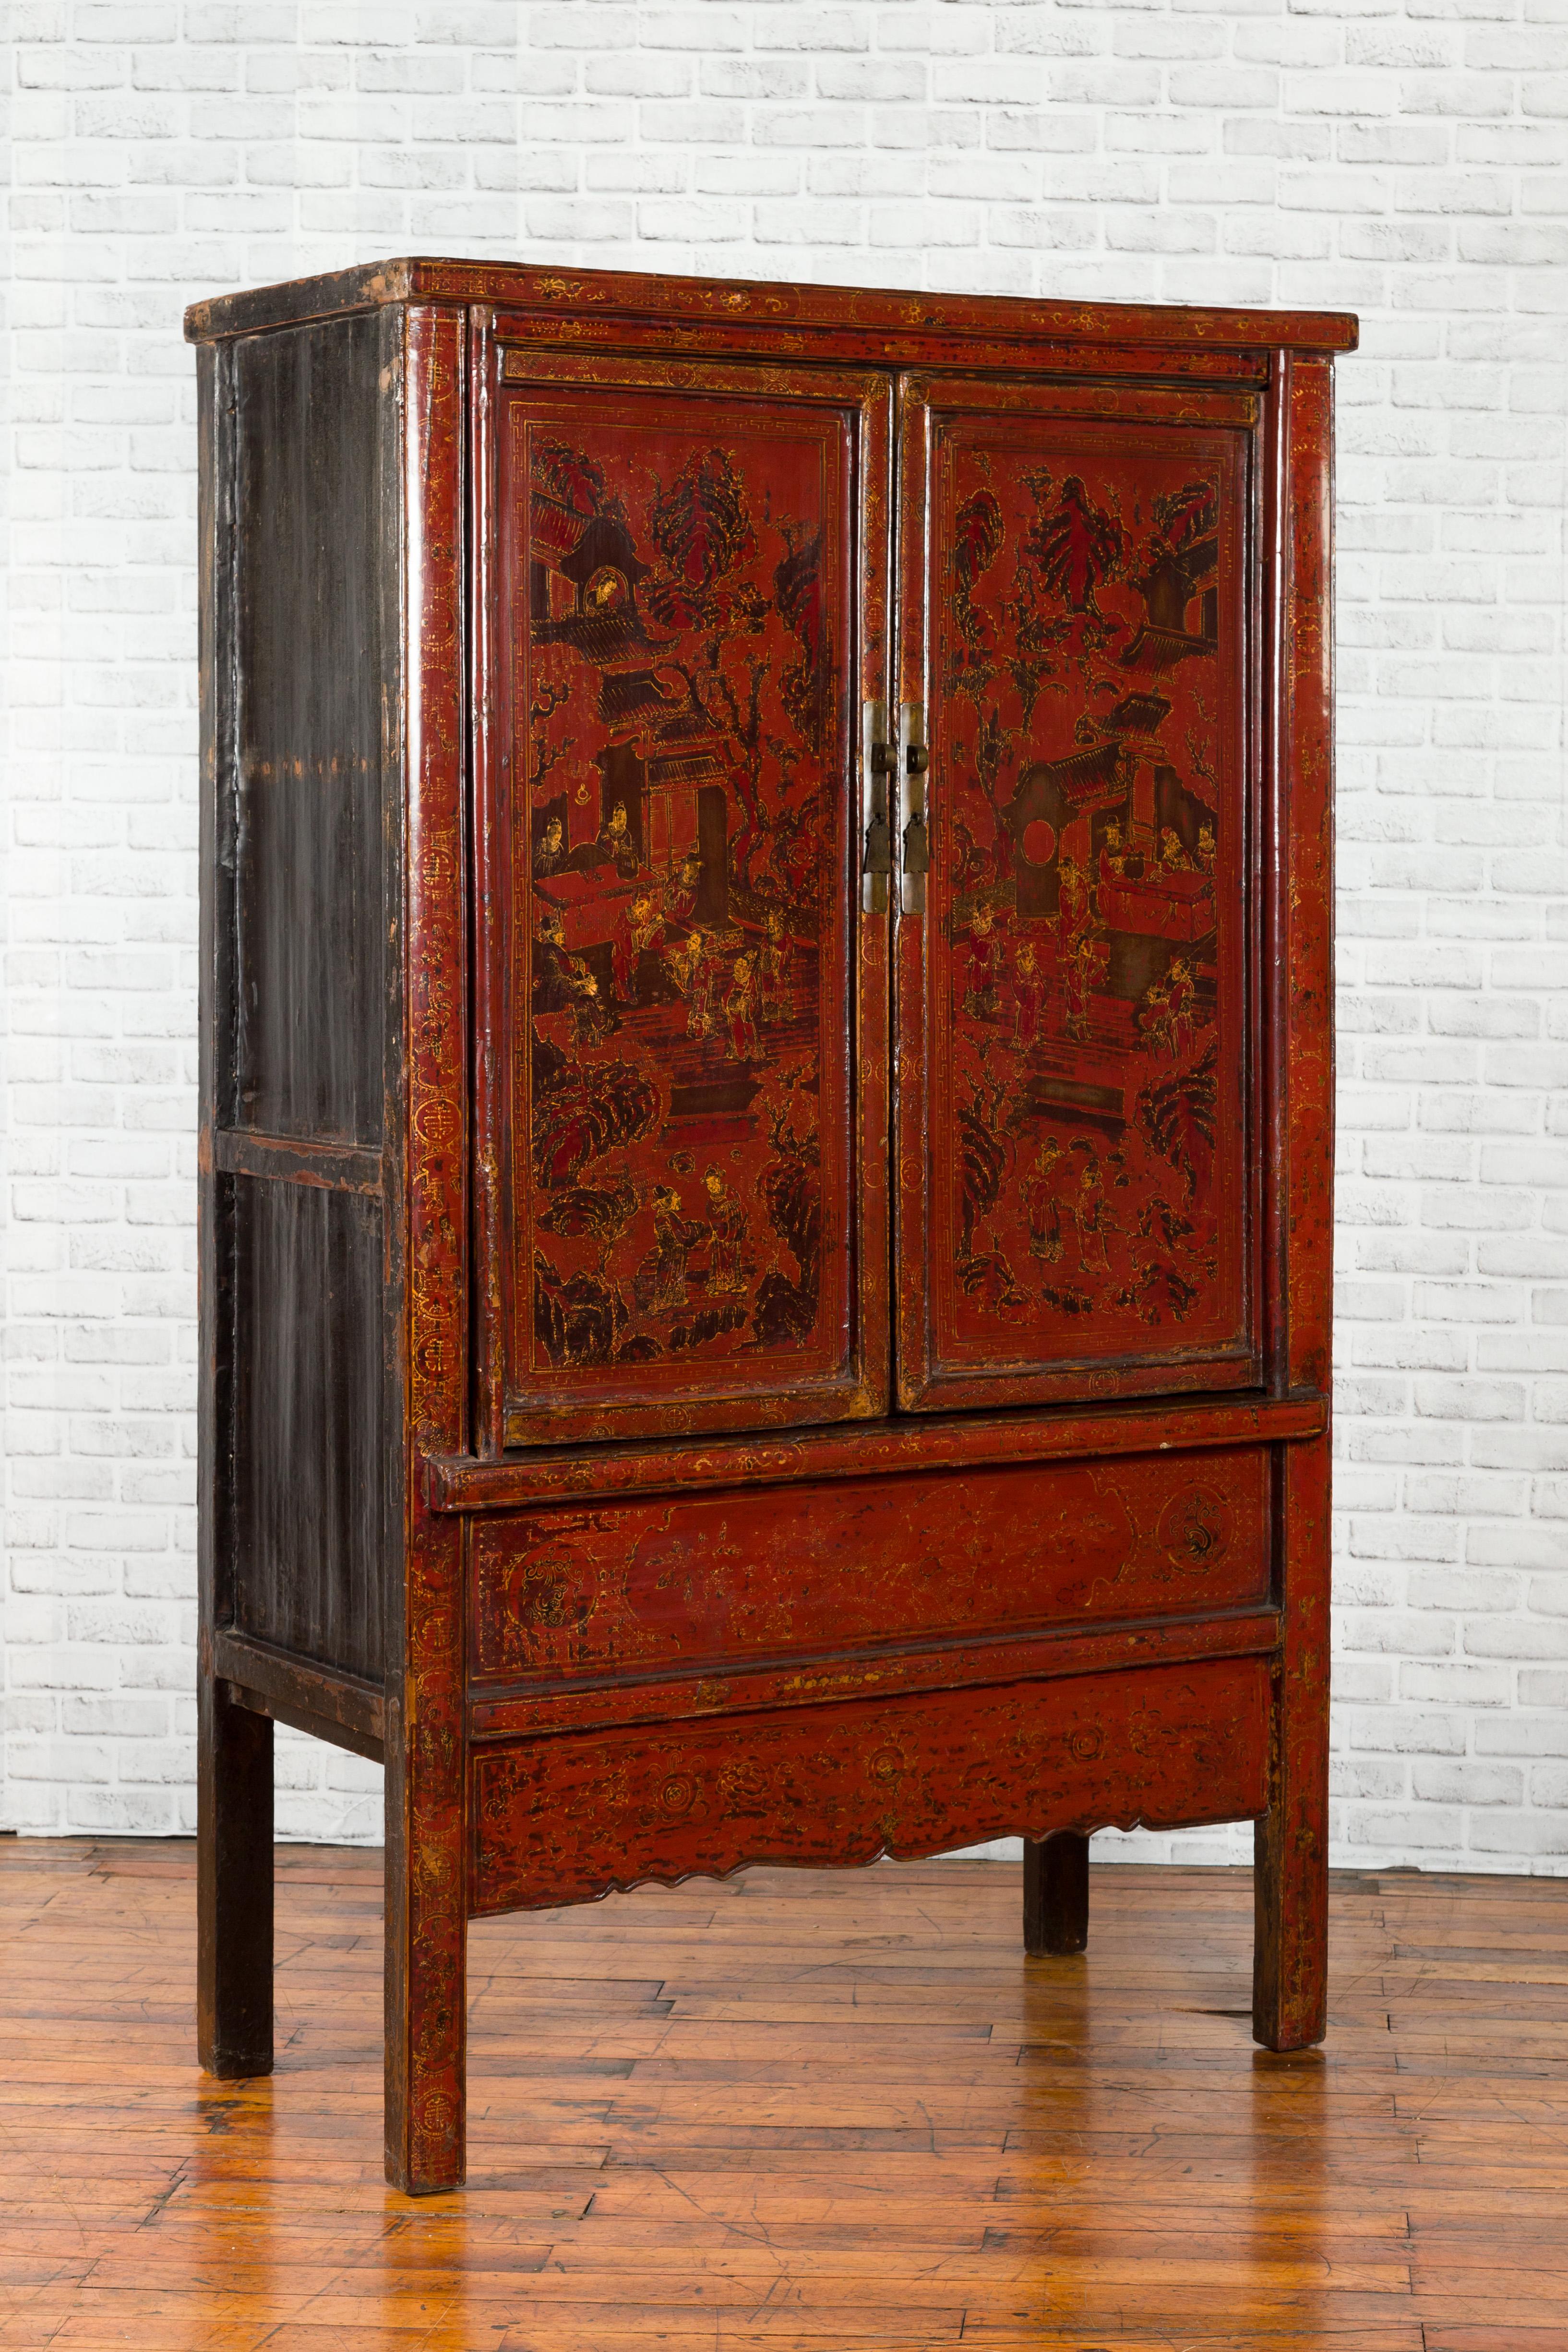 A Chinese Qing Dynasty period red cabinet from the 19th century with hand painted Chinoiserie decor and gilt accents. Created in China during the Qing Dynasty, this cabinet features two doors, adorned with court scenes, opening to reveal inner